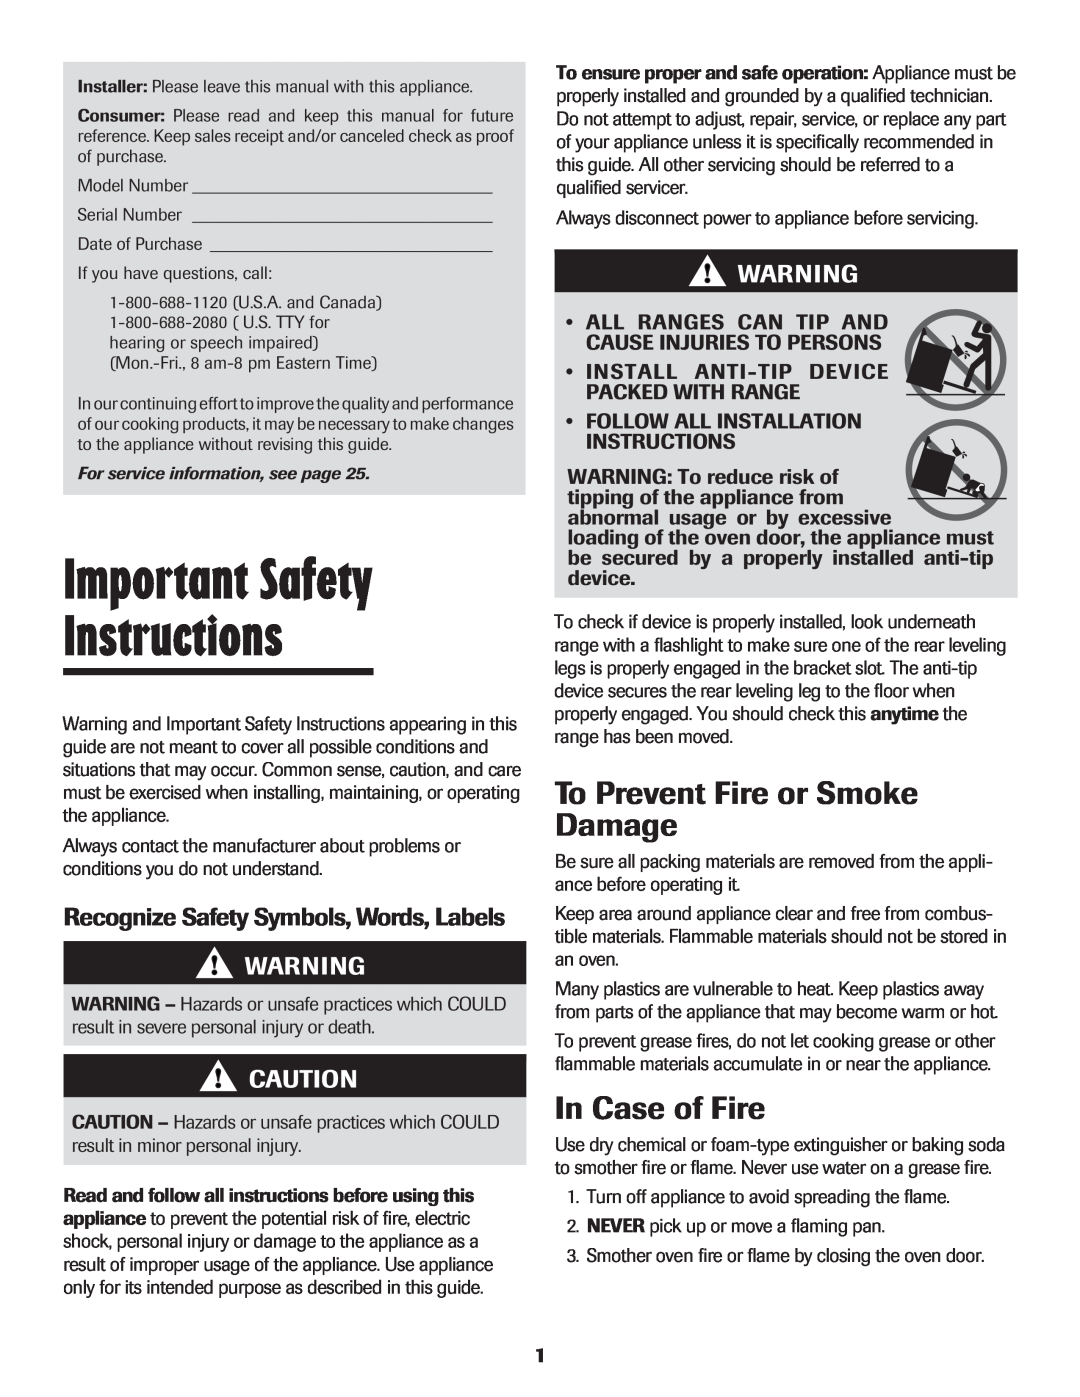 Maytag Oven warranty Important Safety Instructions, To Prevent Fire or Smoke Damage, In Case of Fire 